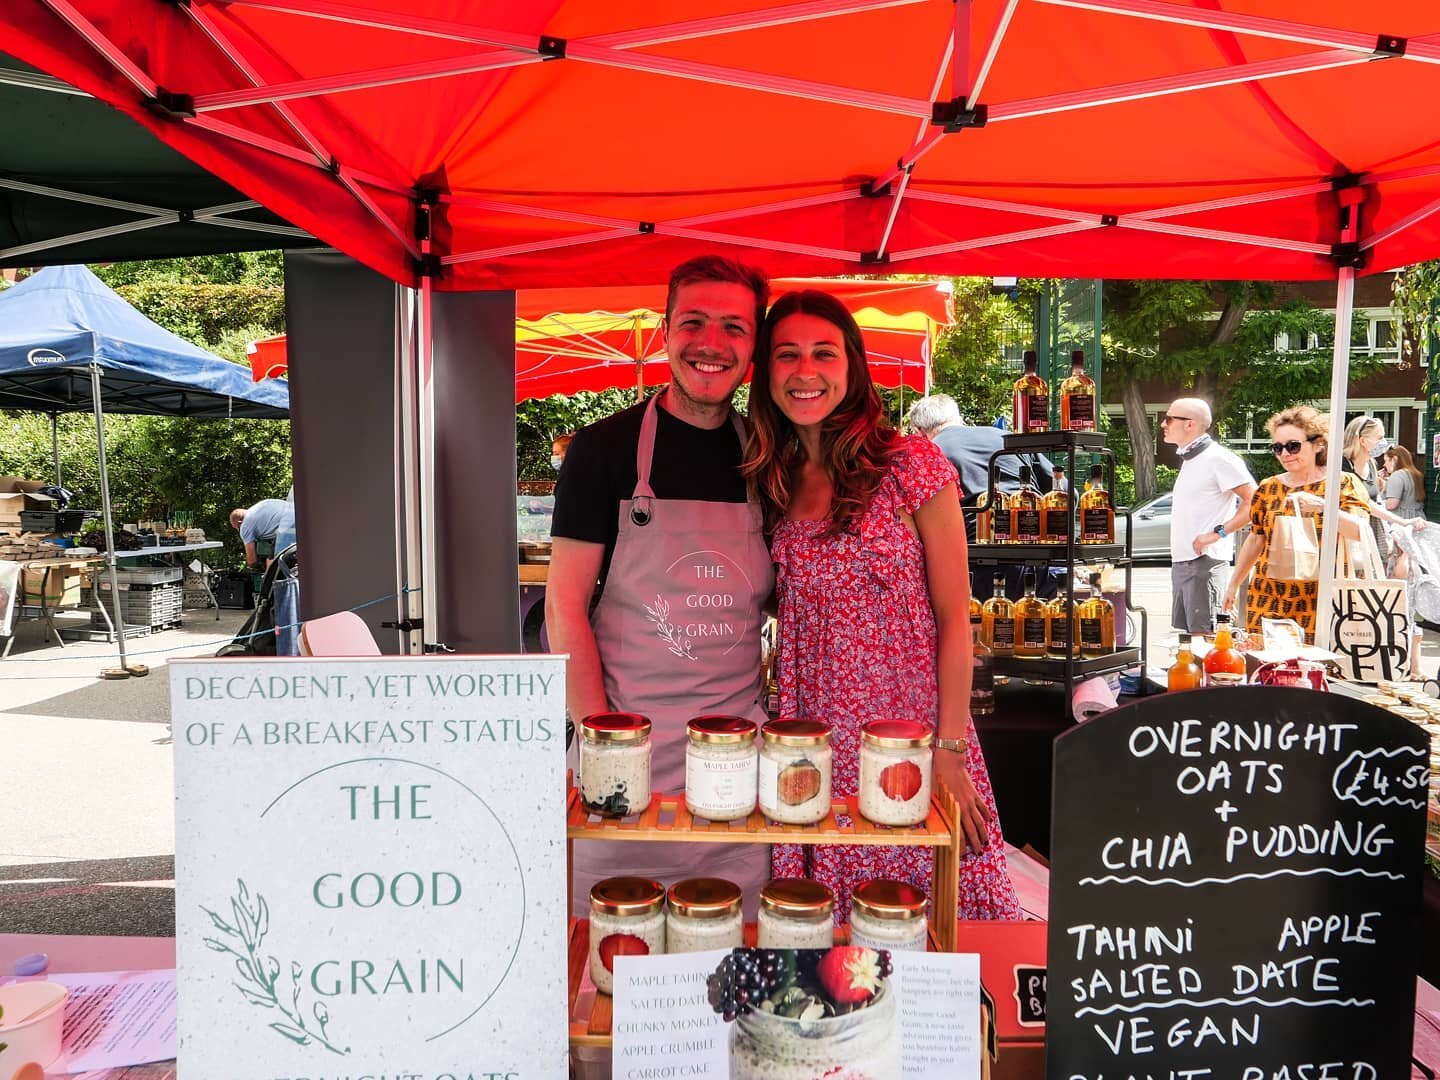 Jubilee and David! Last Saturday at #PrimroseHillFoodMarket. It was their first ever time trading at a market and look how beautiful their stall looked! Jubilee started making chia puddings and overnight oats over lockdown for friends, but they loved